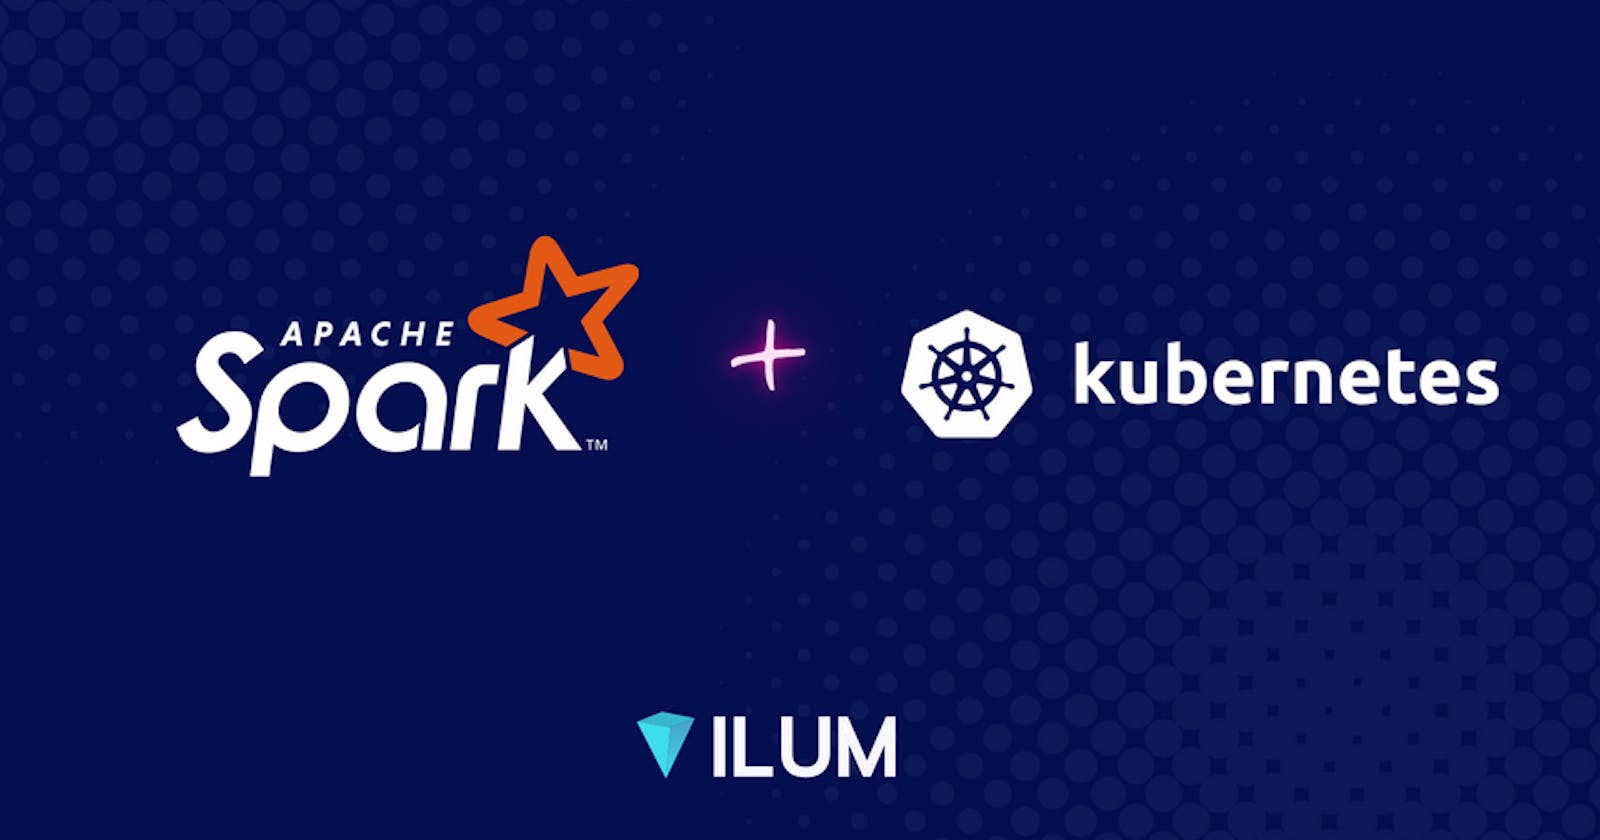 How to run Apache Spark on Kubernetes in less than 5min